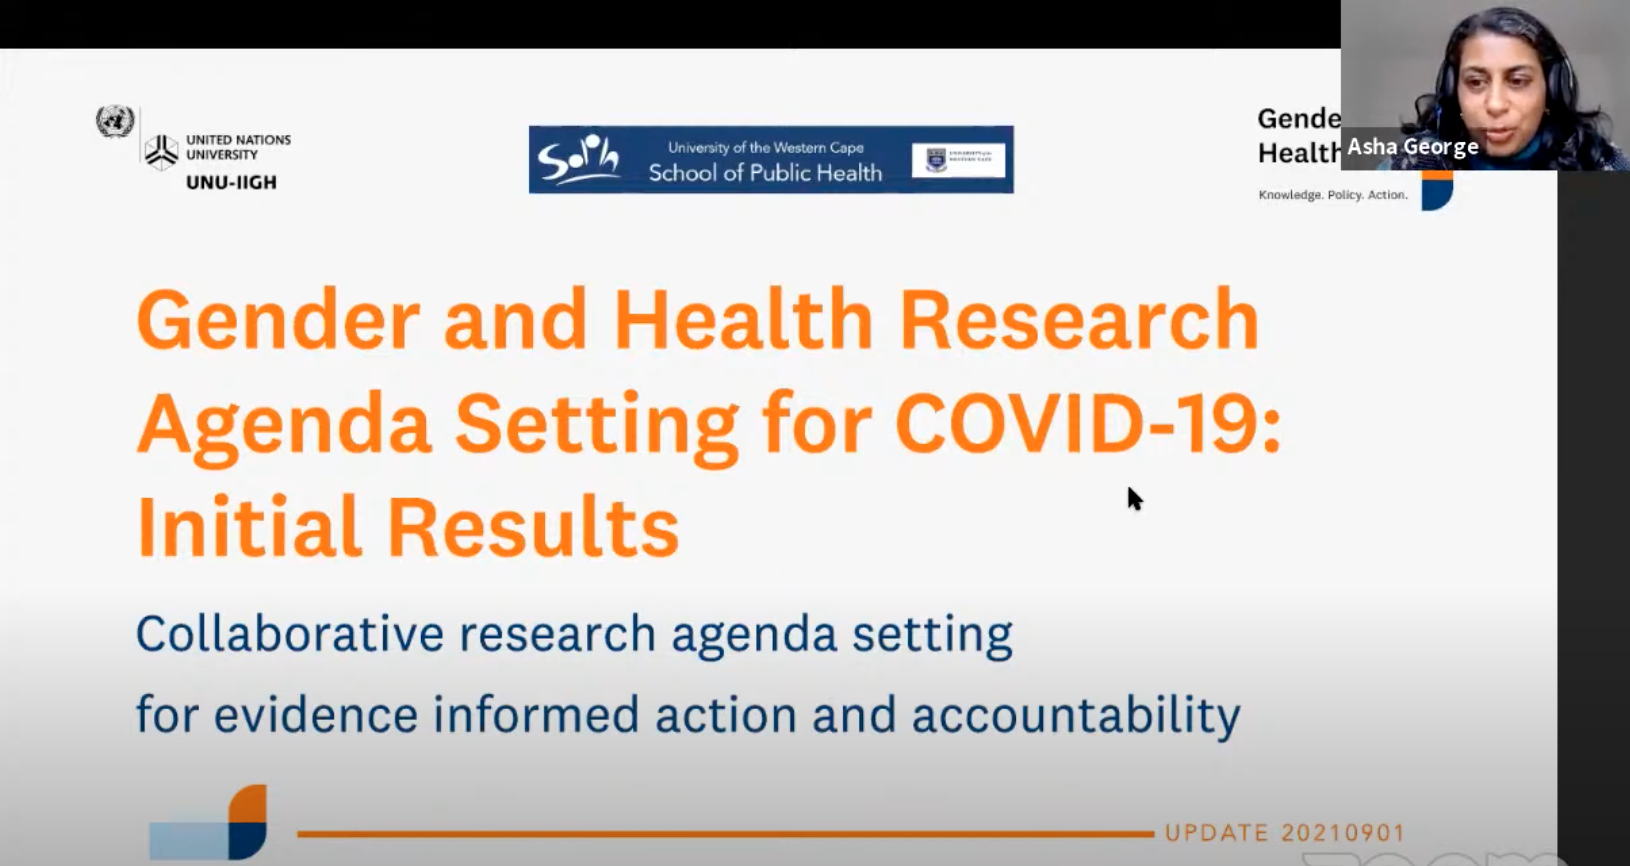 Why collaborative Gender and COVID-19 research agenda-setting is important